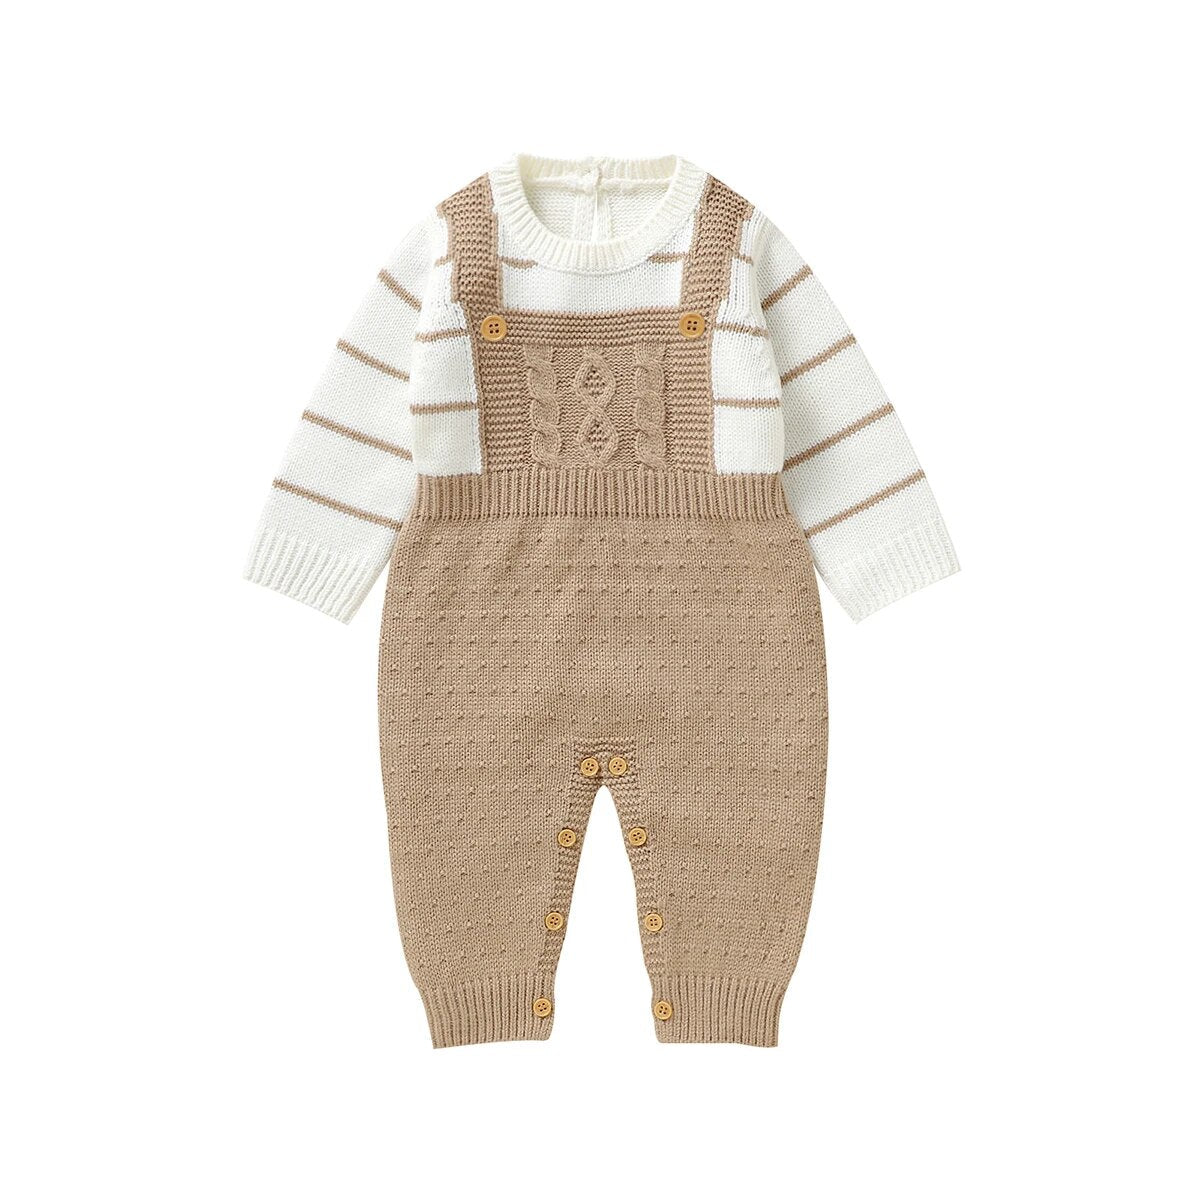 Knitted Stripped Long Sleeve With Jumpsuit Outfit Baby Toddler 3-18 Months - Skaldo & Malin